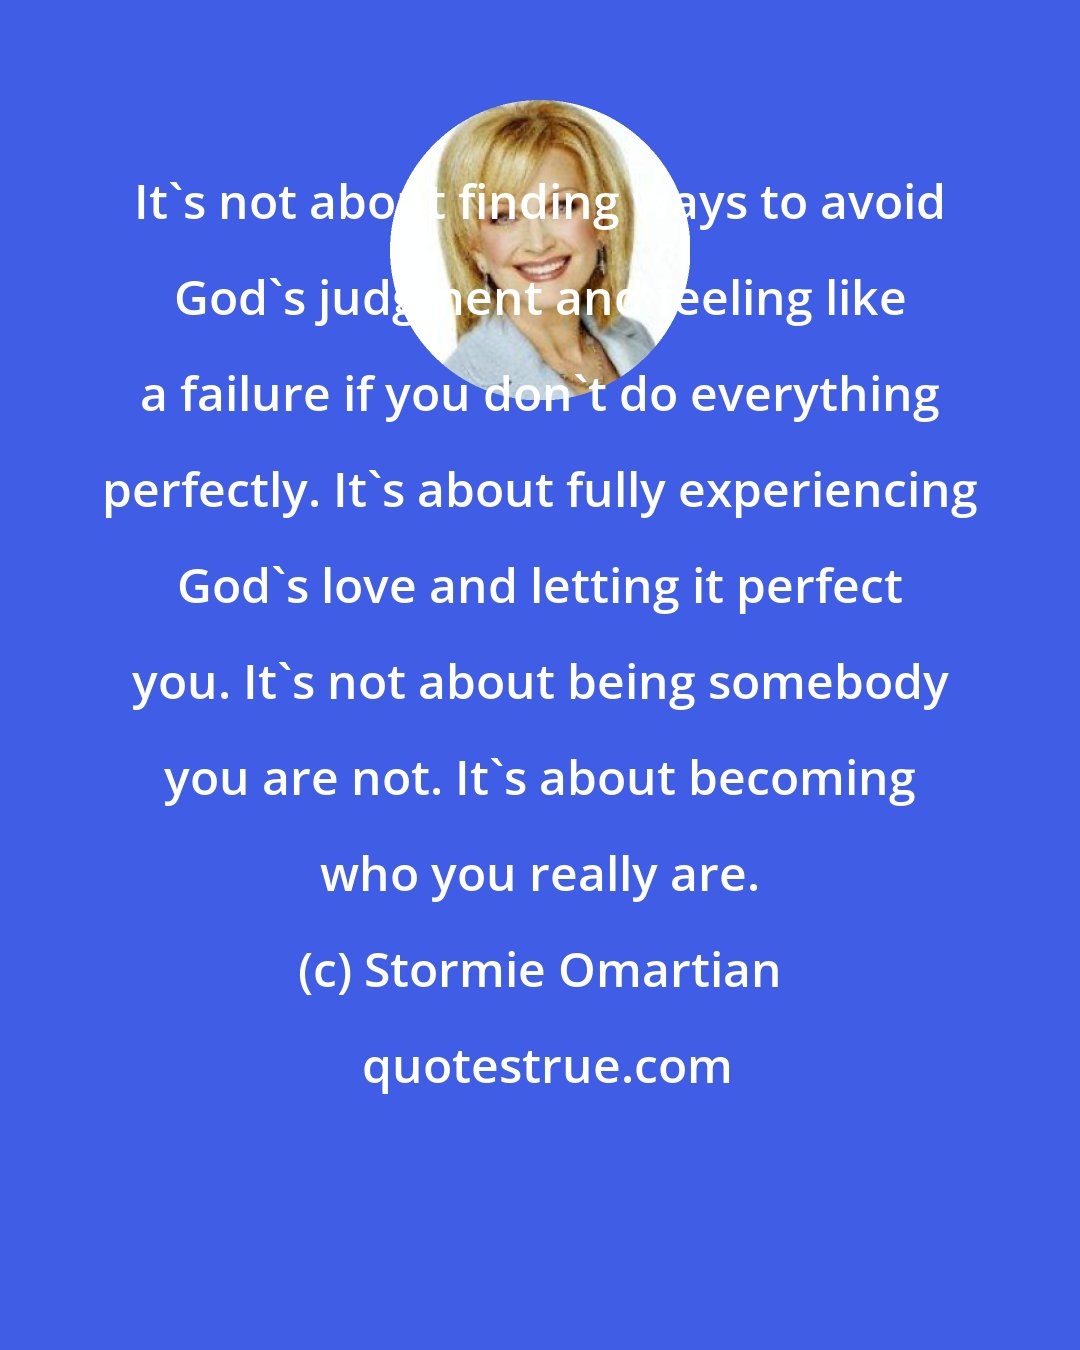 Stormie Omartian: It's not about finding ways to avoid God's judgment and feeling like a failure if you don't do everything perfectly. It's about fully experiencing God's love and letting it perfect you. It's not about being somebody you are not. It's about becoming who you really are.